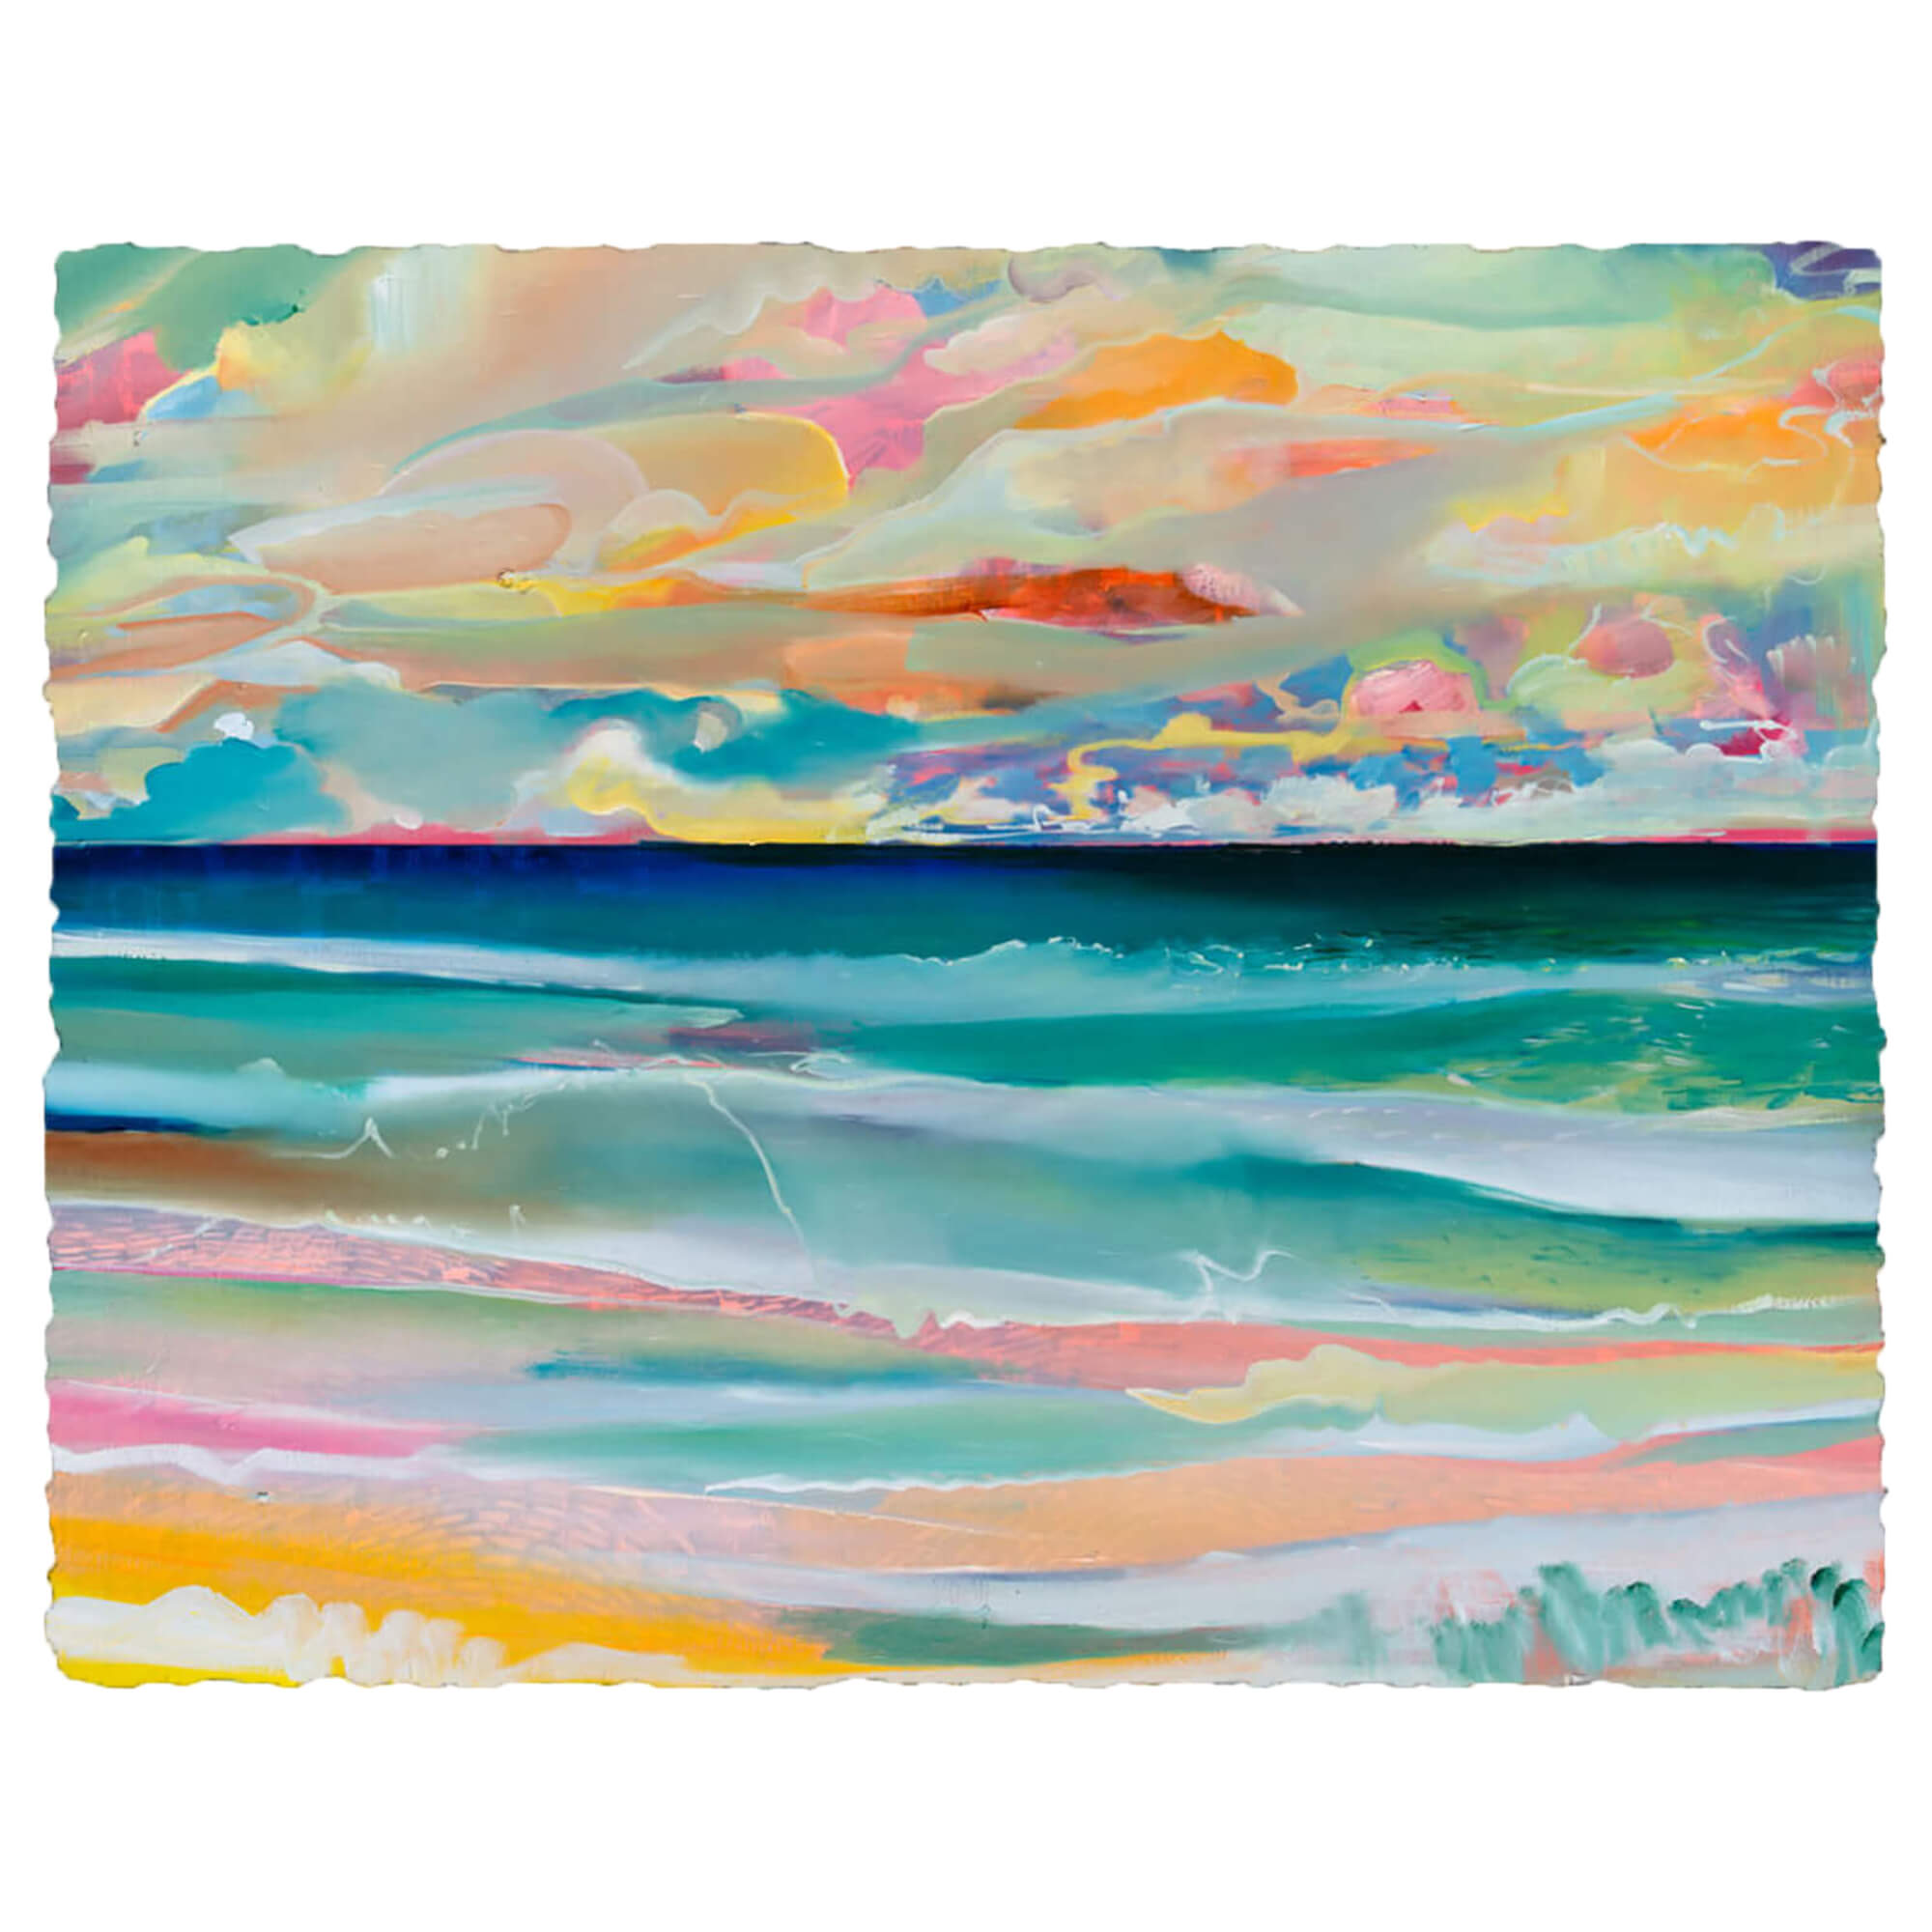 A deckled paper art print of an abstract artwork of a seascape with pink, yellow and teal hues by Hawaii artist Saumolia Puapuaga